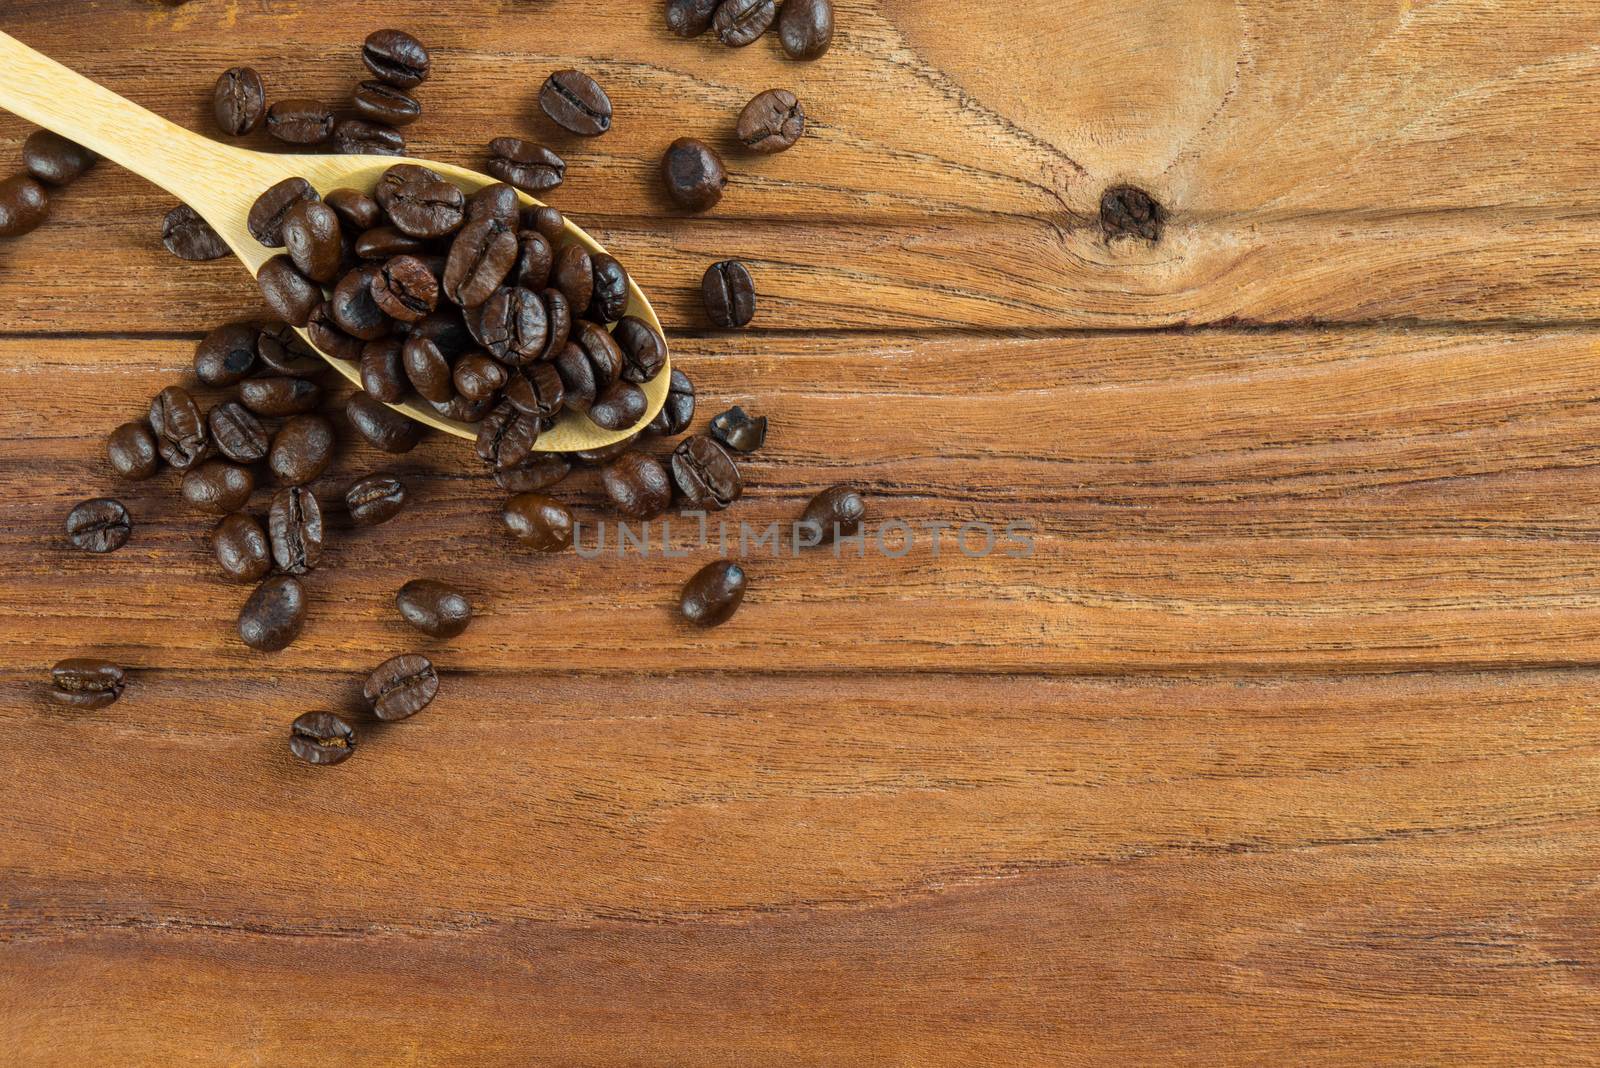 Coffee bean on wooden spoon and wooden table background